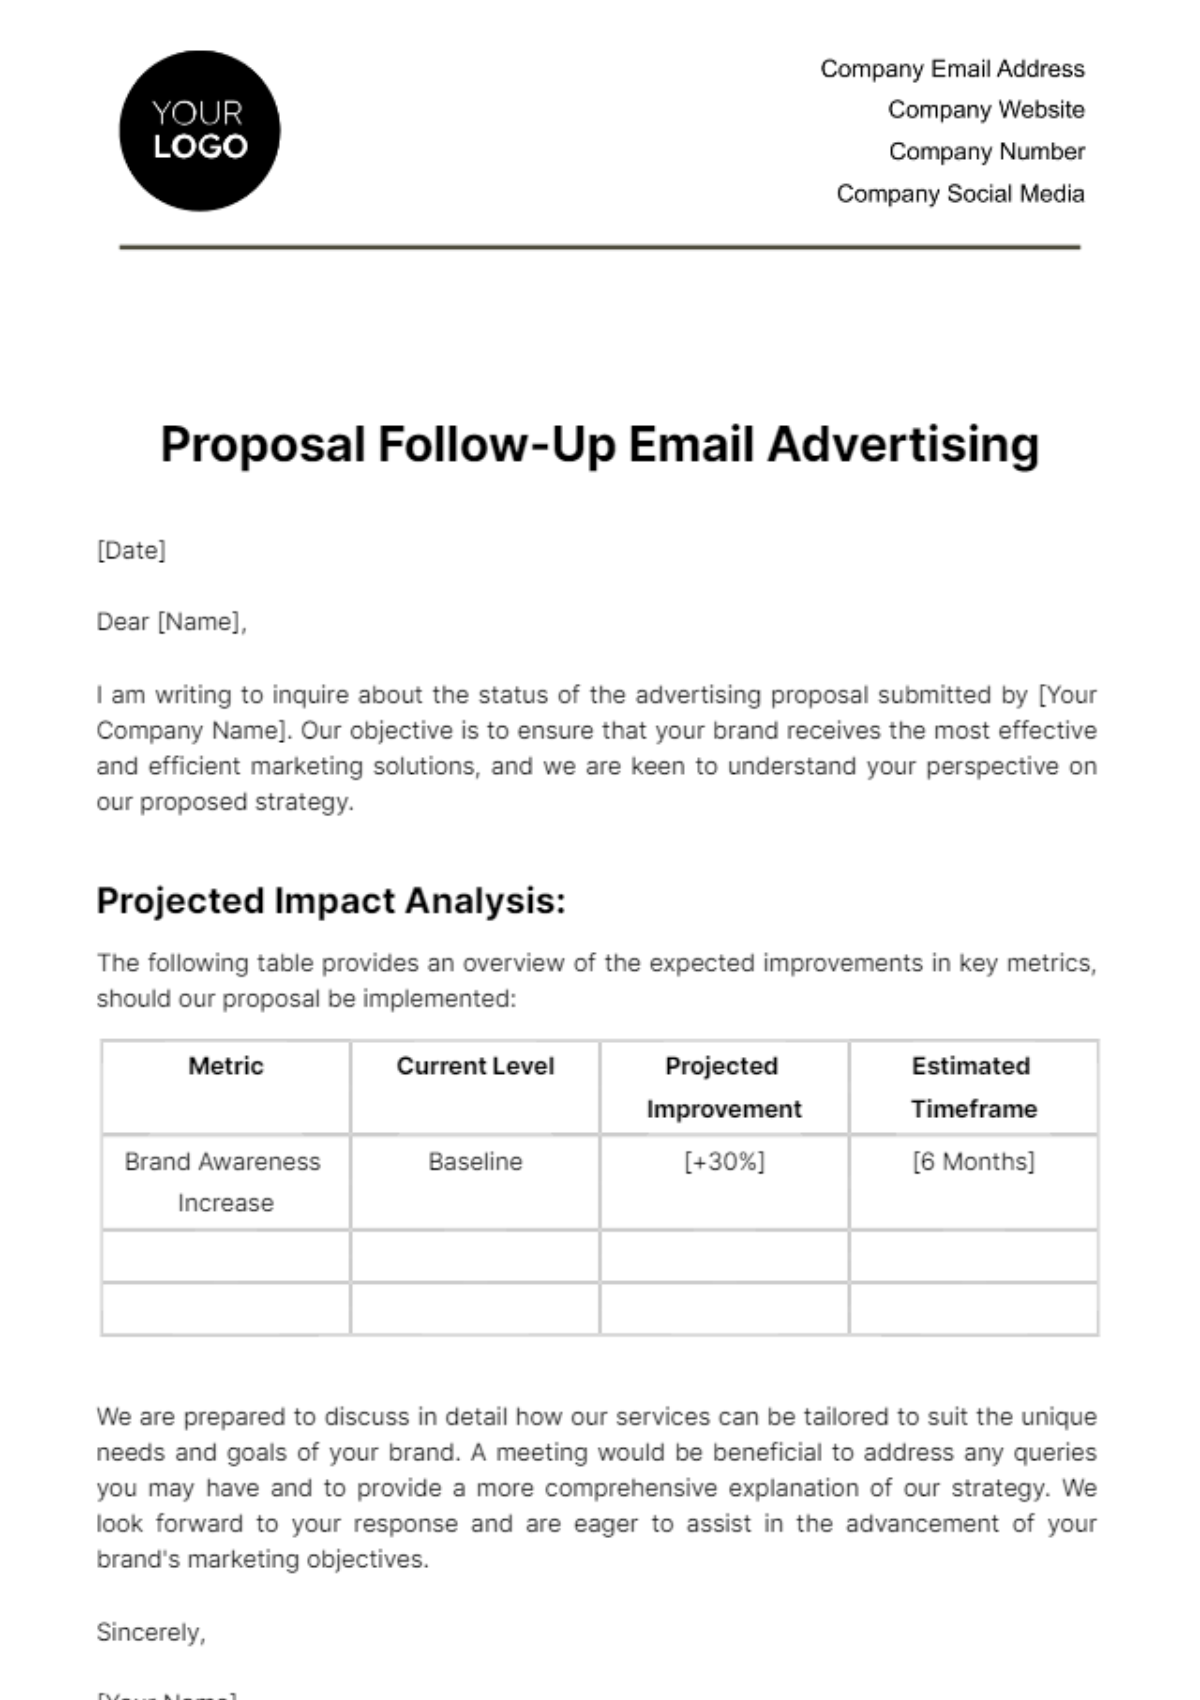 Free Proposal Follow-Up Email Advertising Template